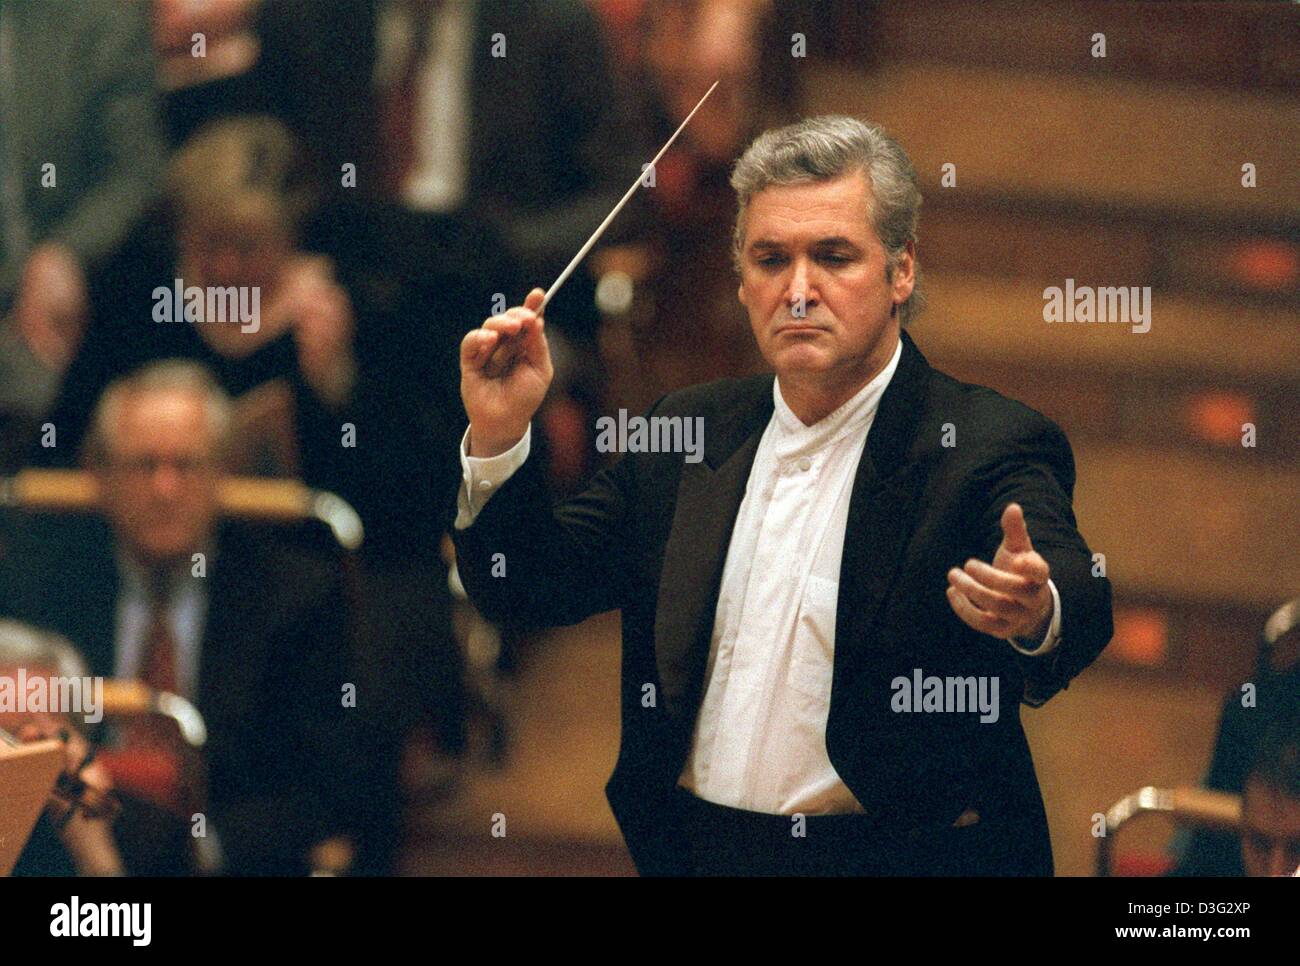 (dpa files) - Pinchas Zukerman, Israeli violinist, violist, conductor, pedagogue and chamber musician, conducts during a rehearsal in the Philharmonie, one of the world's most beautiful concert halls, in Cologne, Germany, 7 March 2002. Pinchas Zukerman has been successful worldwide for four decades. His discography comprises more than 100 recordings and 21 Grammy nominations. Stock Photo